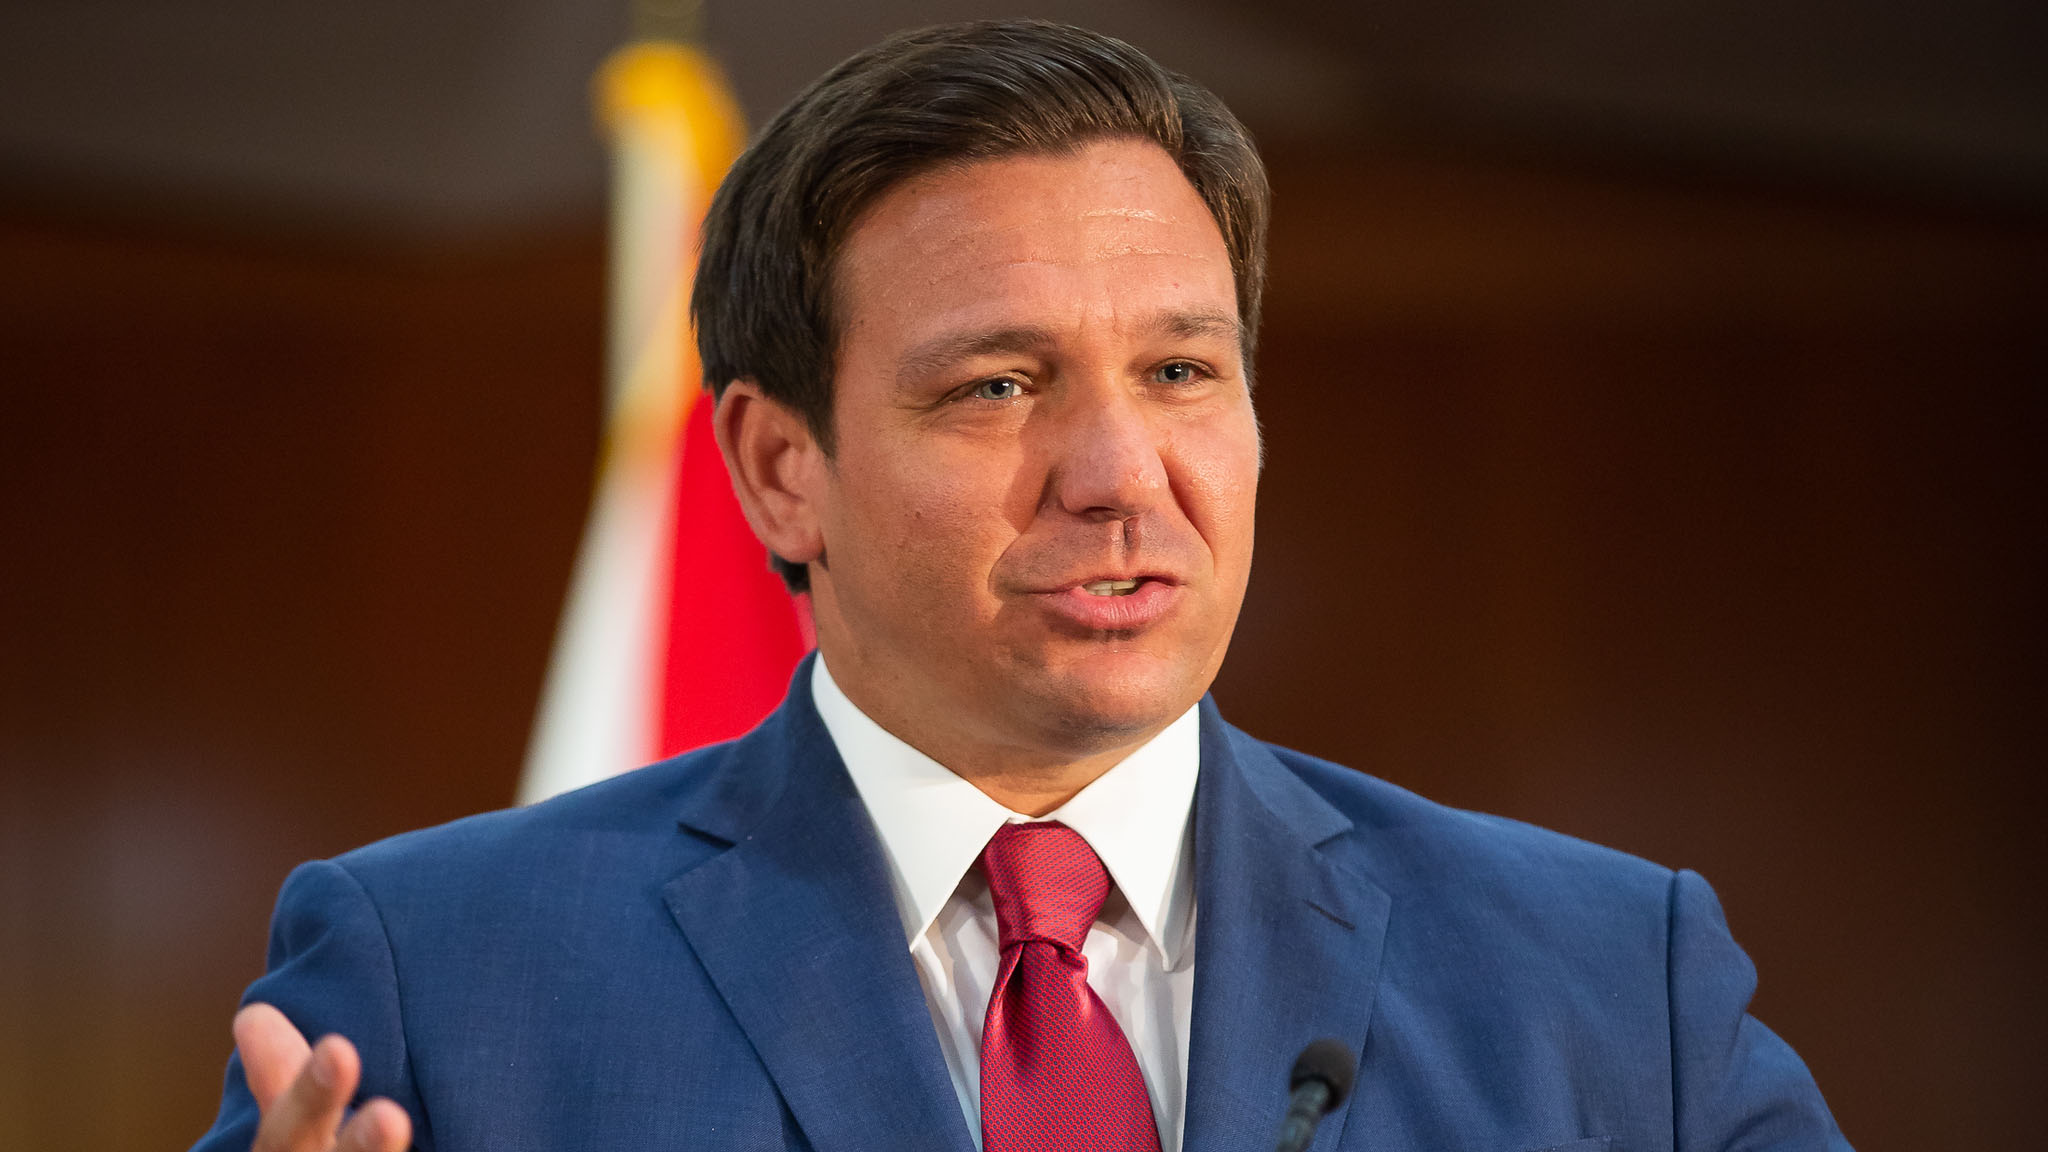 DeSantis wins Wisconsin GOP’s 2024 presidential candidate poll